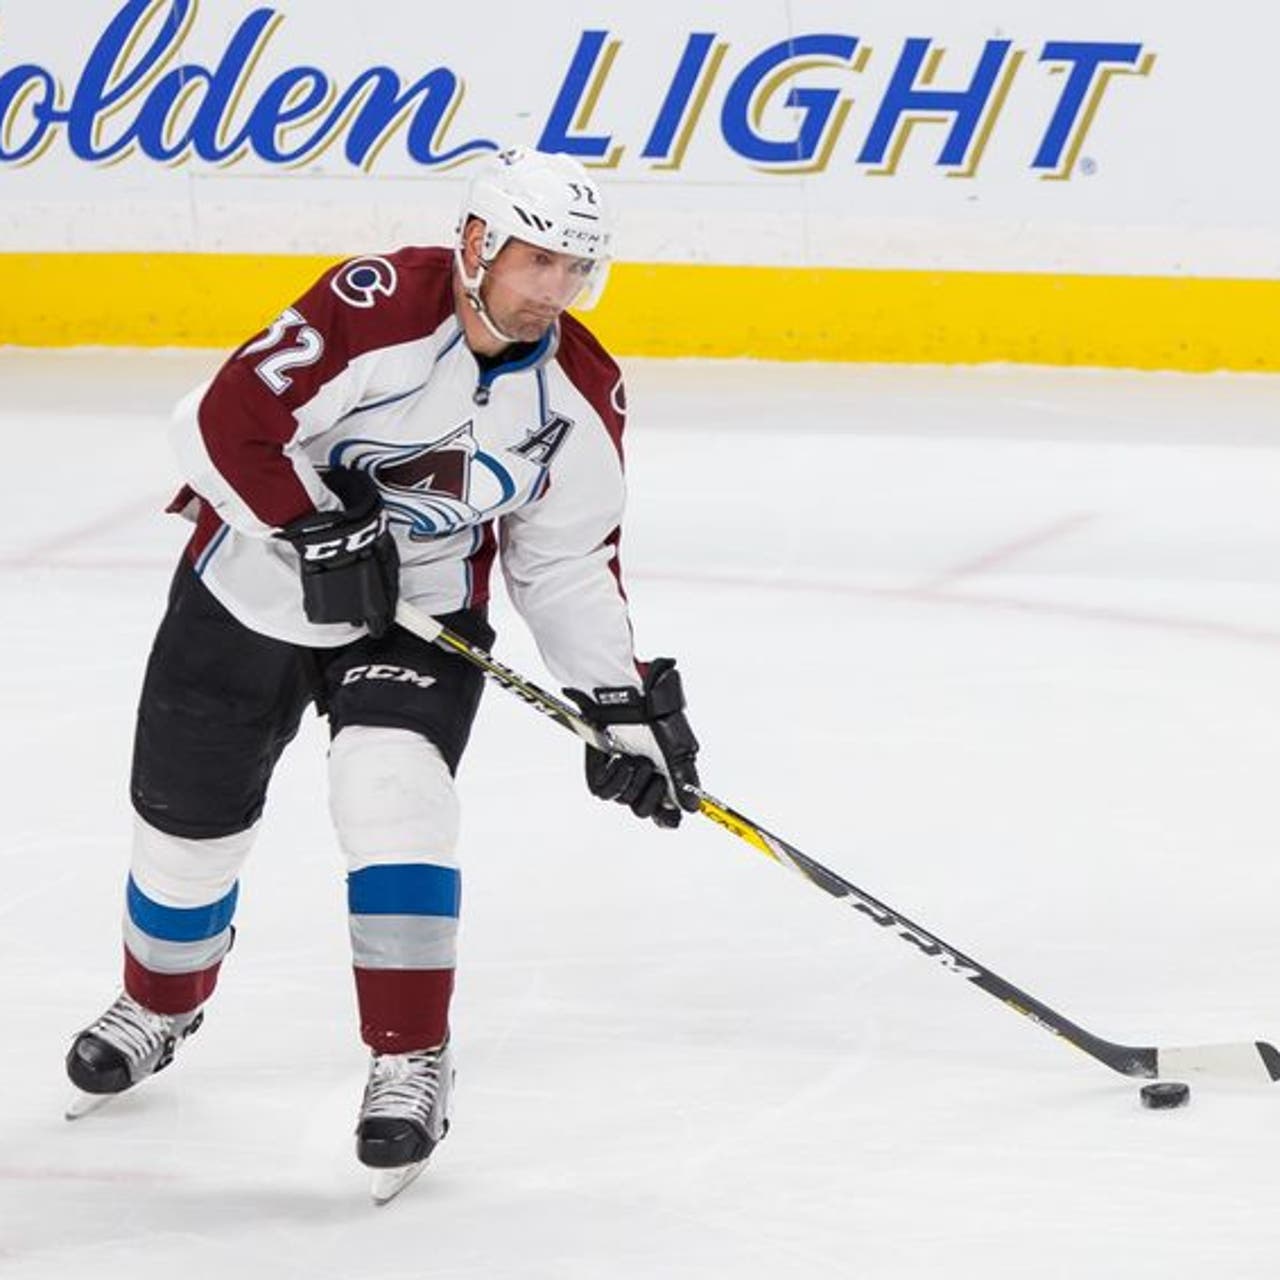 Breaking down the 2017-18 Colorado Avalanche roster - the Forwards